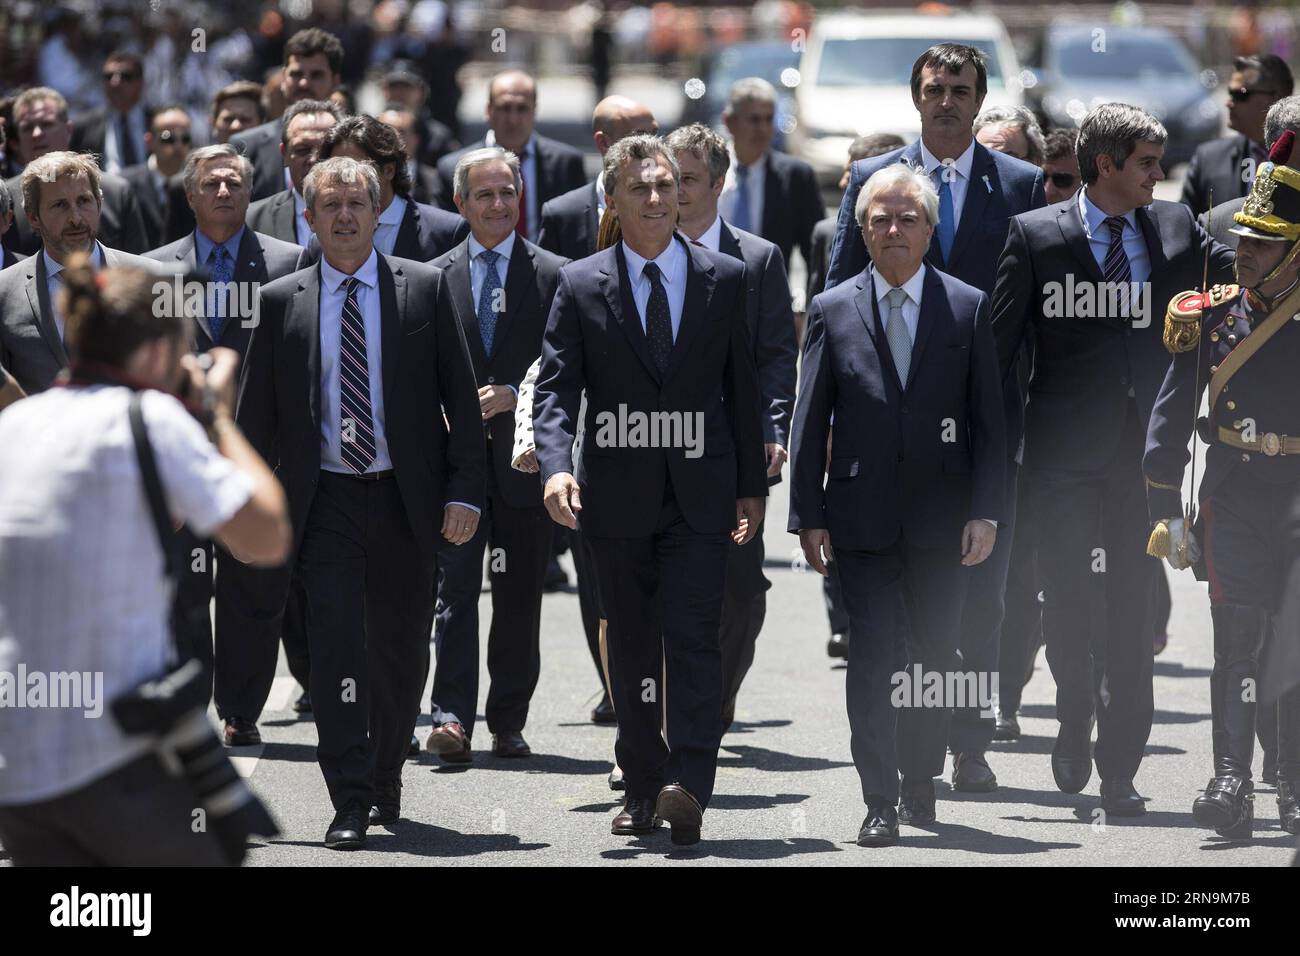 (151211) -- BUENOS AIRES, Dec. 11, 2015 -- Argentina s President Mauricio Macri (C) walks on May Avenue with his Cabinet to participate in the Tedeum at the Metropolitan Cathedral in Buenos Aires, capital of Argentina, Dec. 11, 2015. According to local press, Mauricio Macri Friday attended the traditional religious service at the Metropolital Cathedral, one day after his pesidential inauguration. Martin Zabala) (jg) (fnc) ARGENTINA-BUENOS AIRES-POLITICS-PRESIDENT e MARTINxZABALA PUBLICATIONxNOTxINxCHN   151211 Buenos Aires DEC 11 2015 Argentina S President Mauricio Macri C Walks ON May Avenue Stock Photo